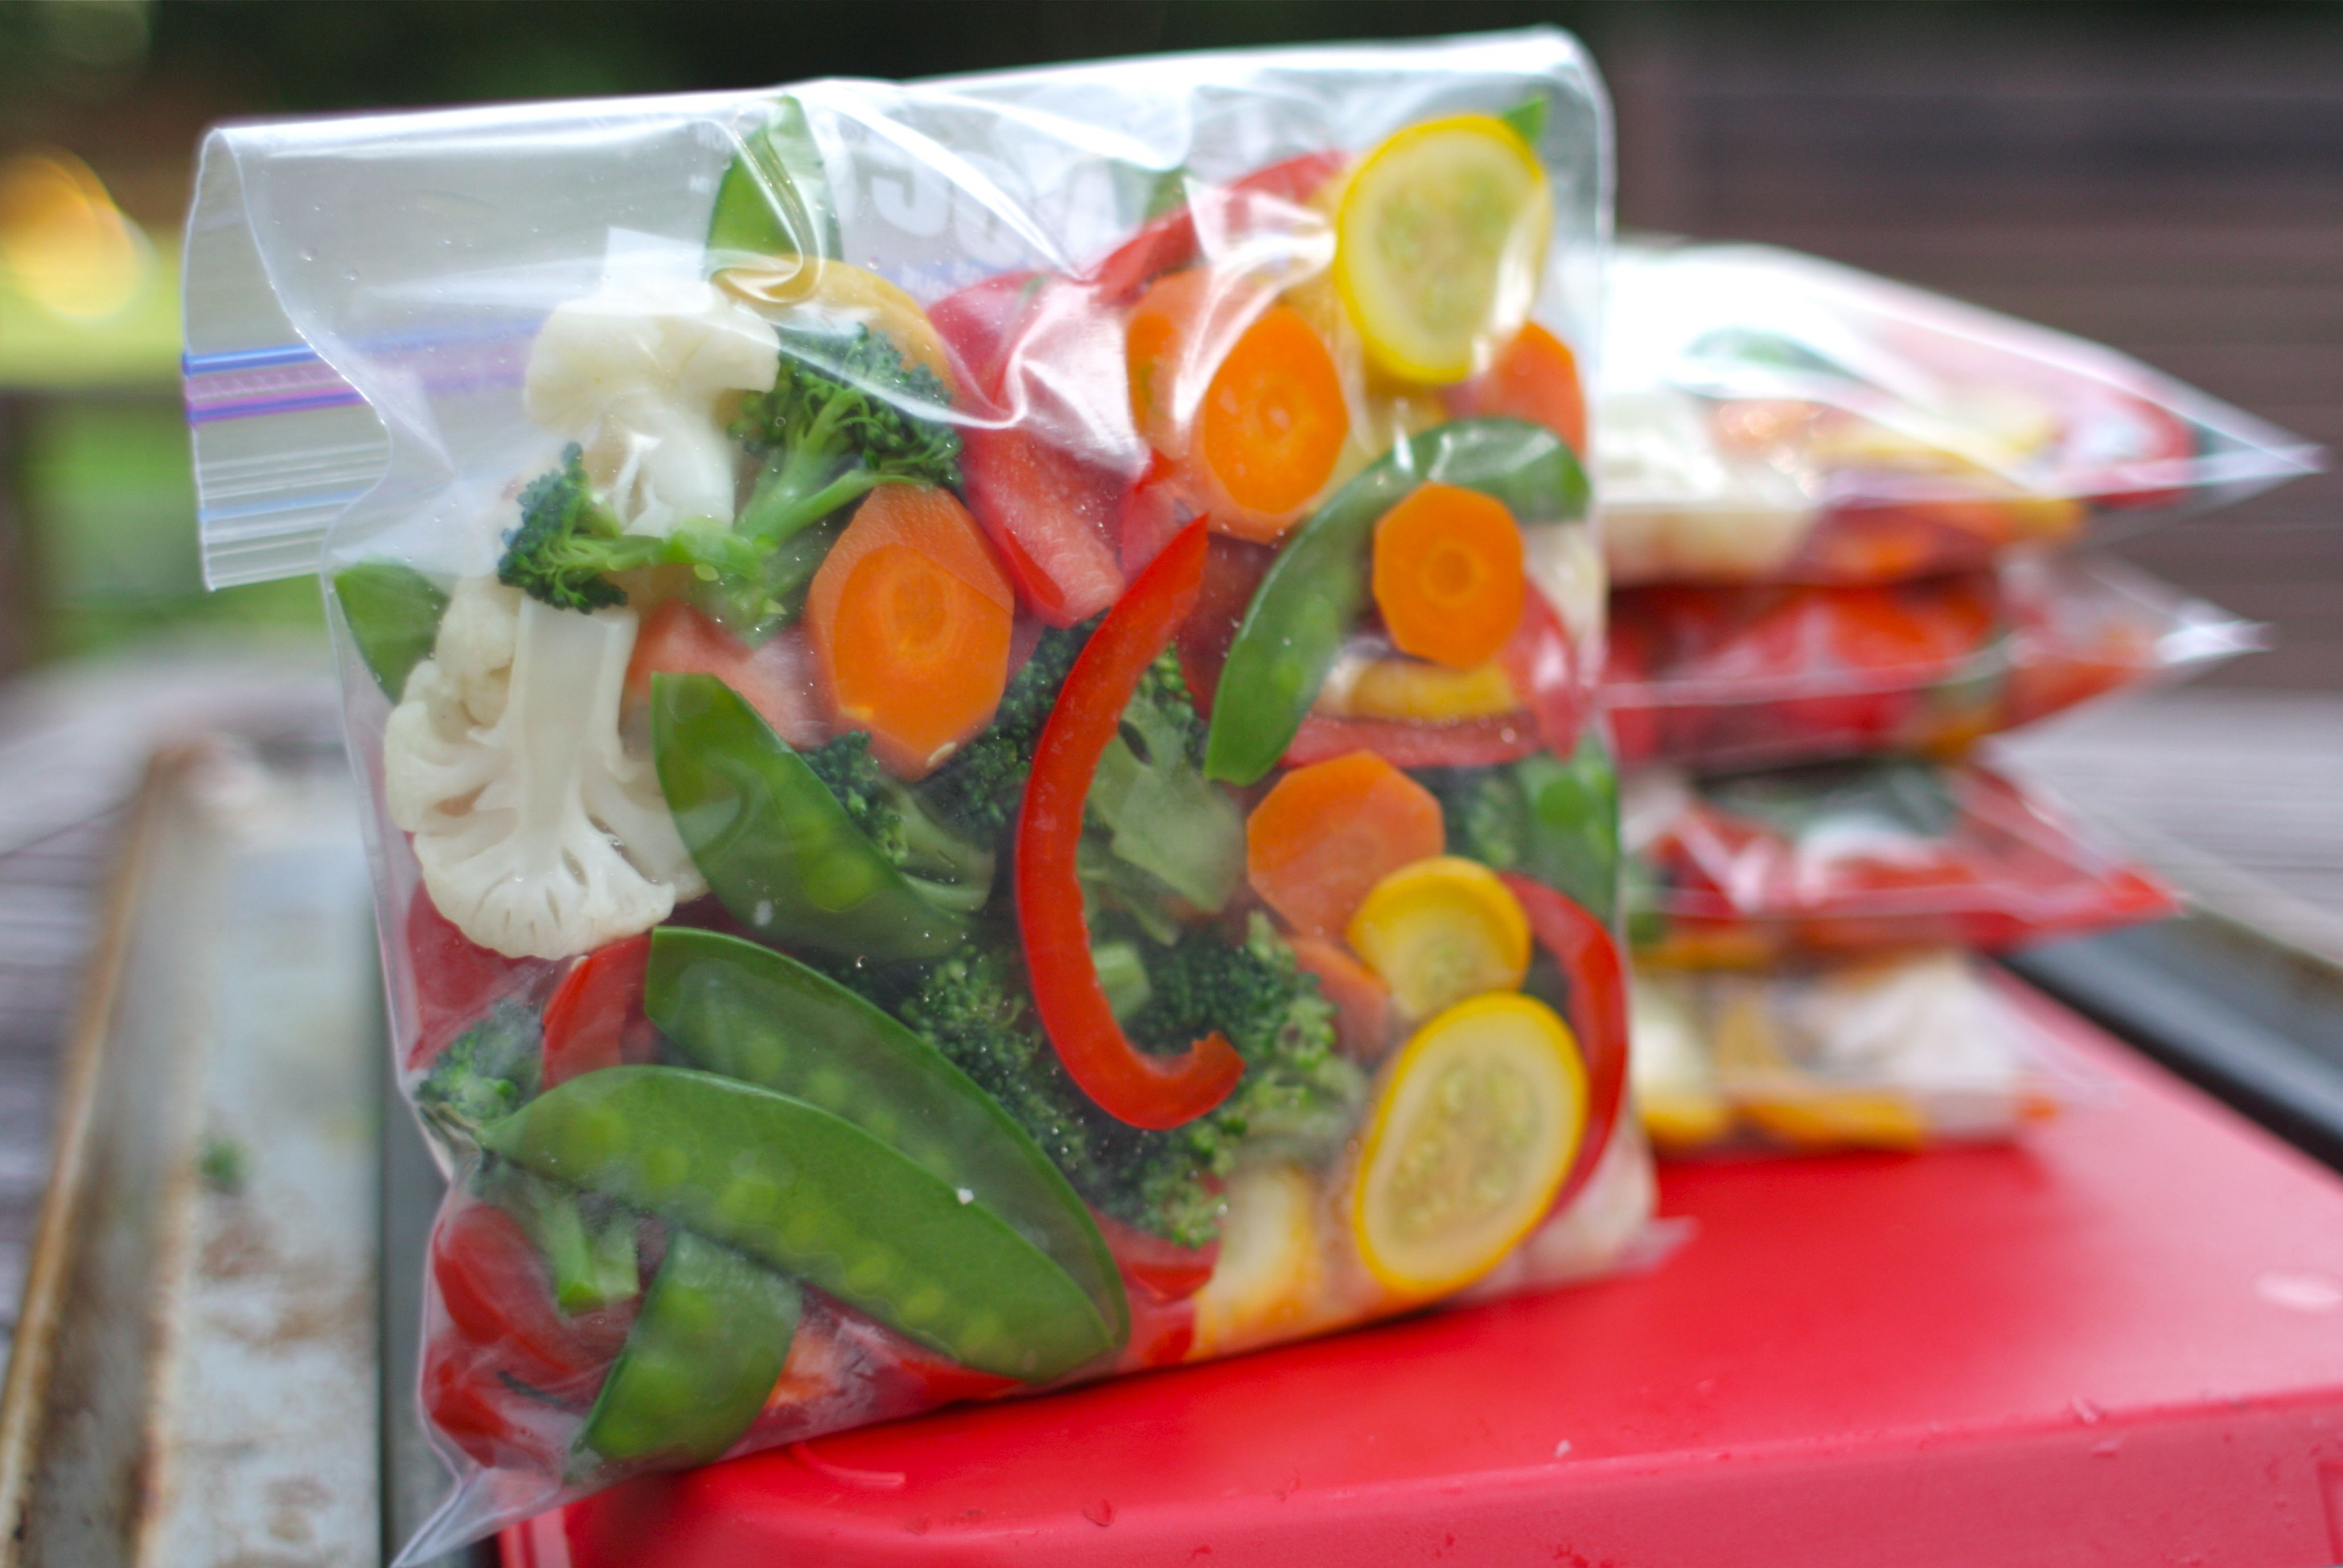 Do you have to blanch vegetables before freezing?